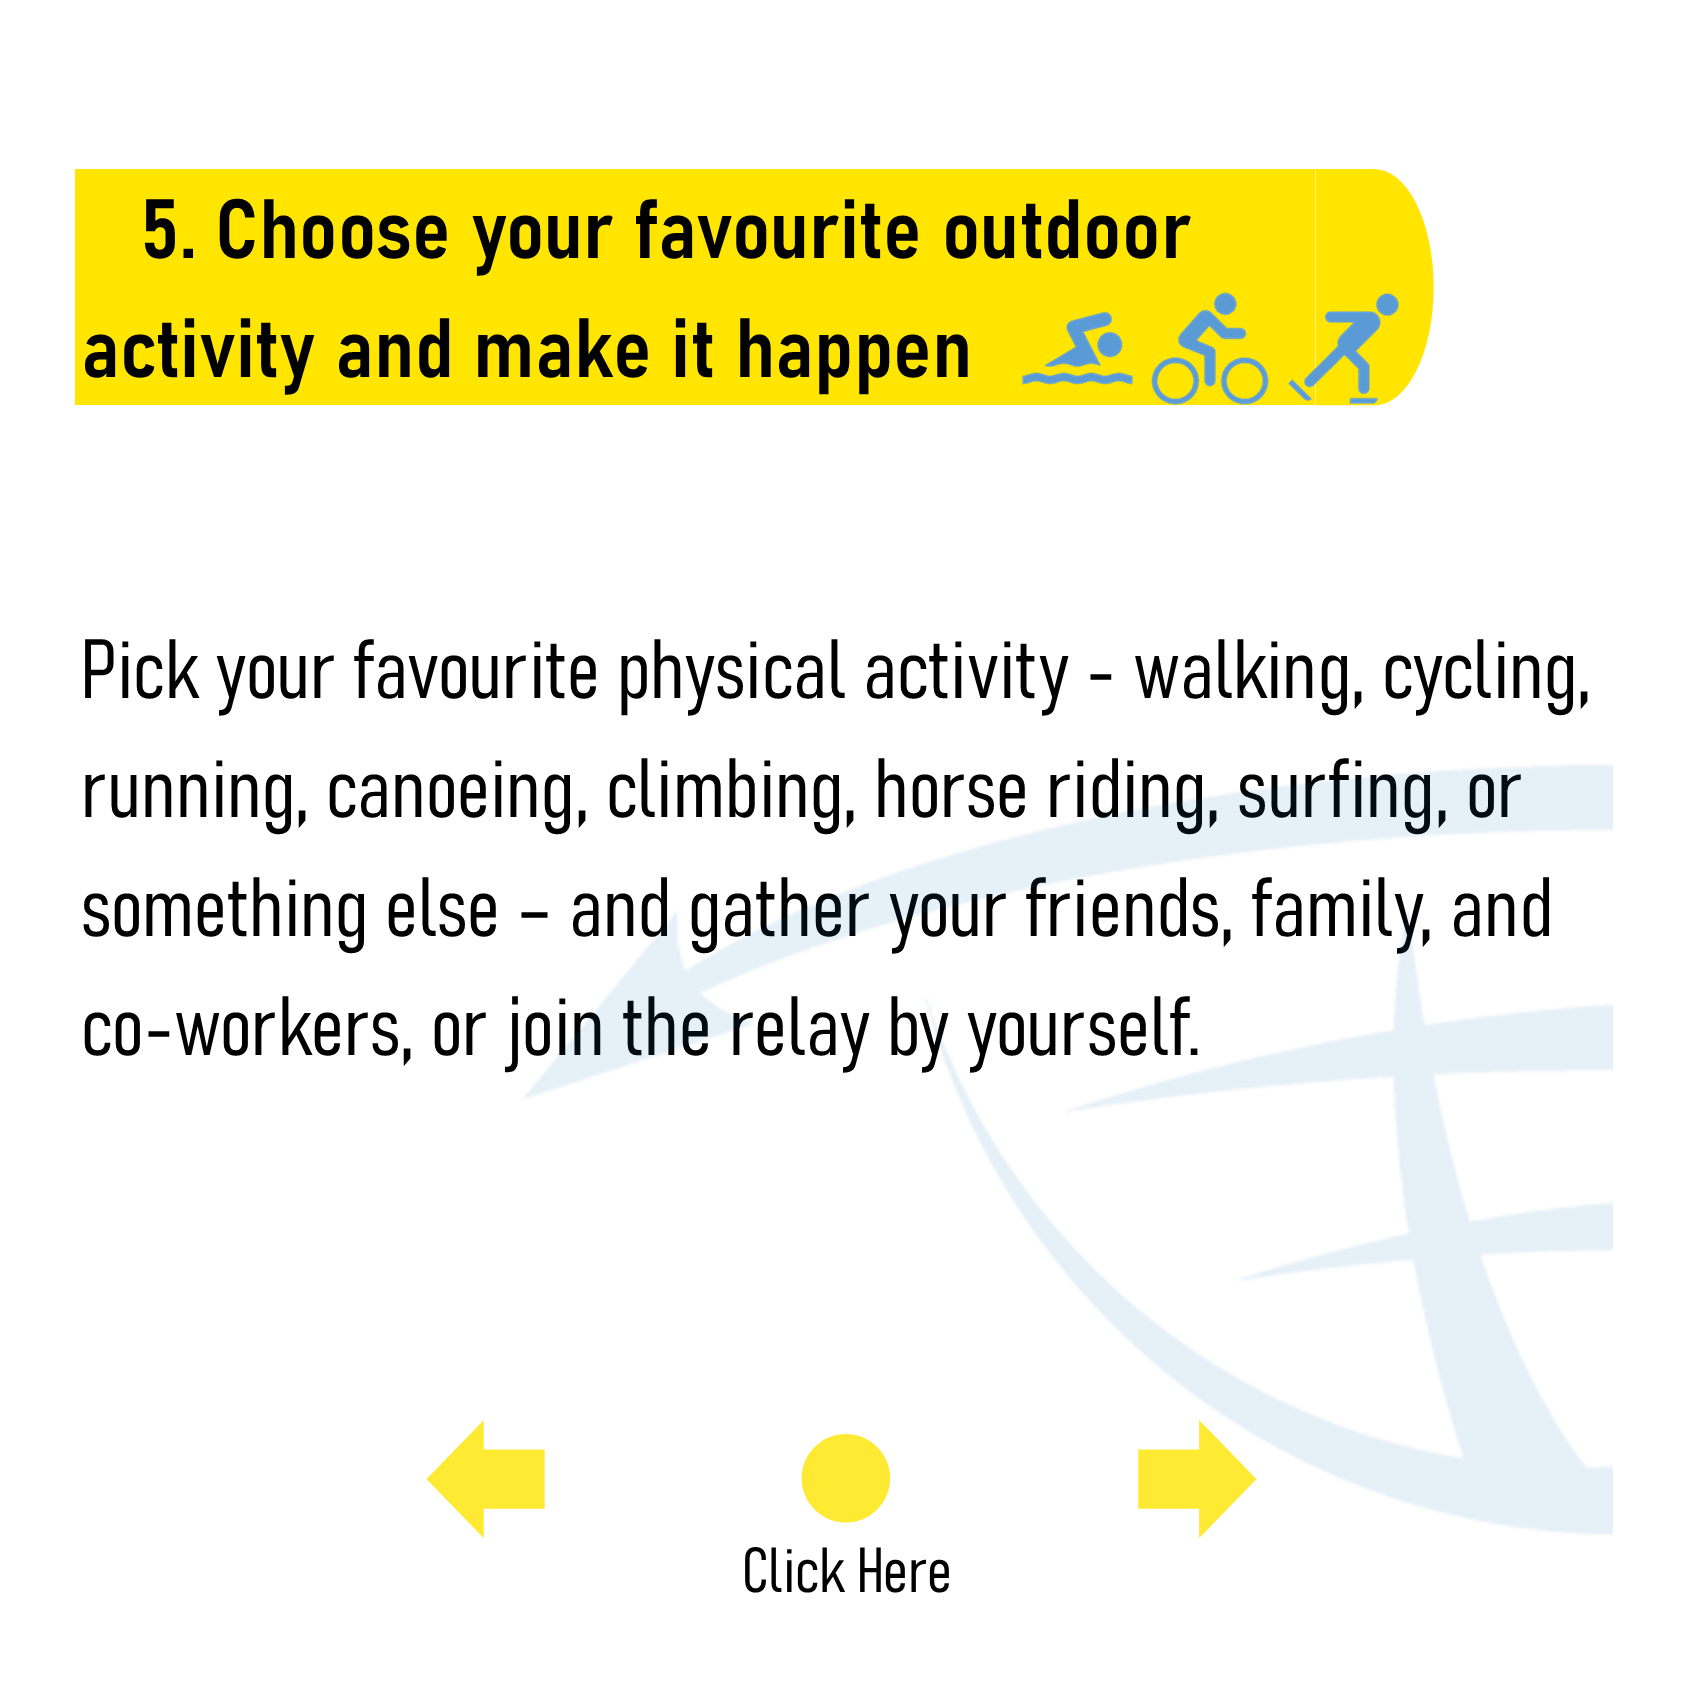 5. Choose your favourite outdoor activity and make it happen